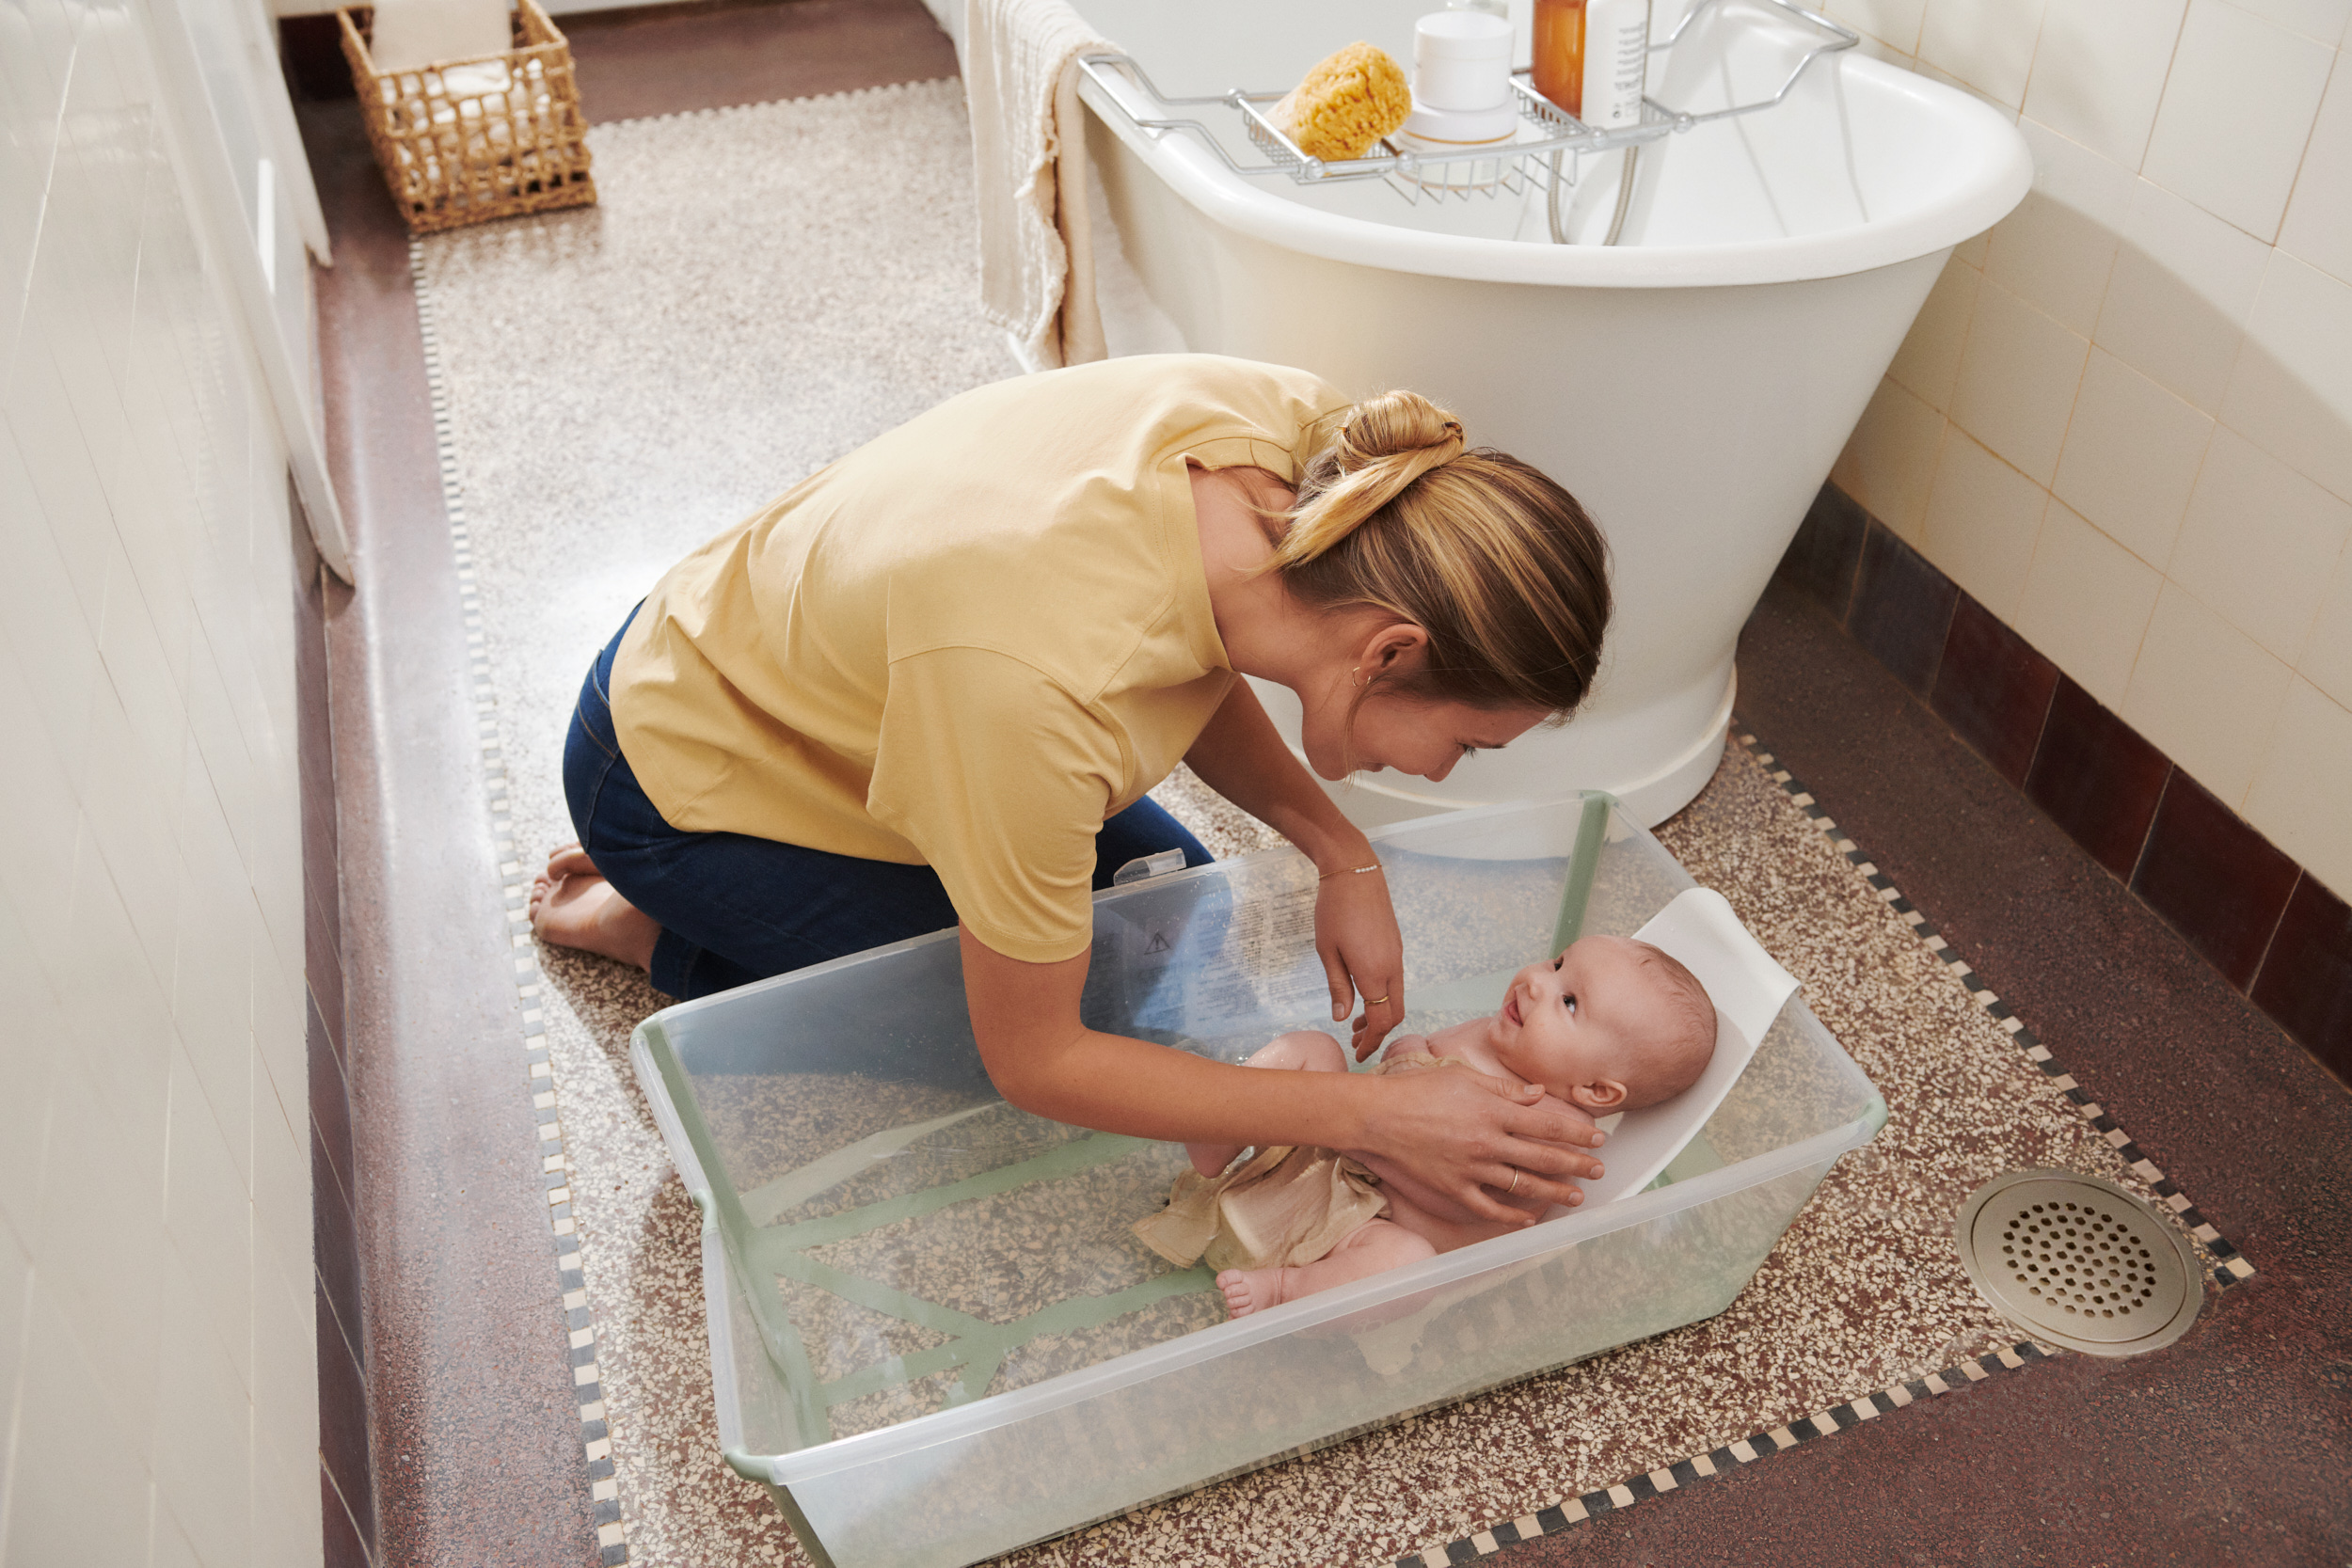 The Stokke Flexi Bath folds away, reducing clutter in your bathroom